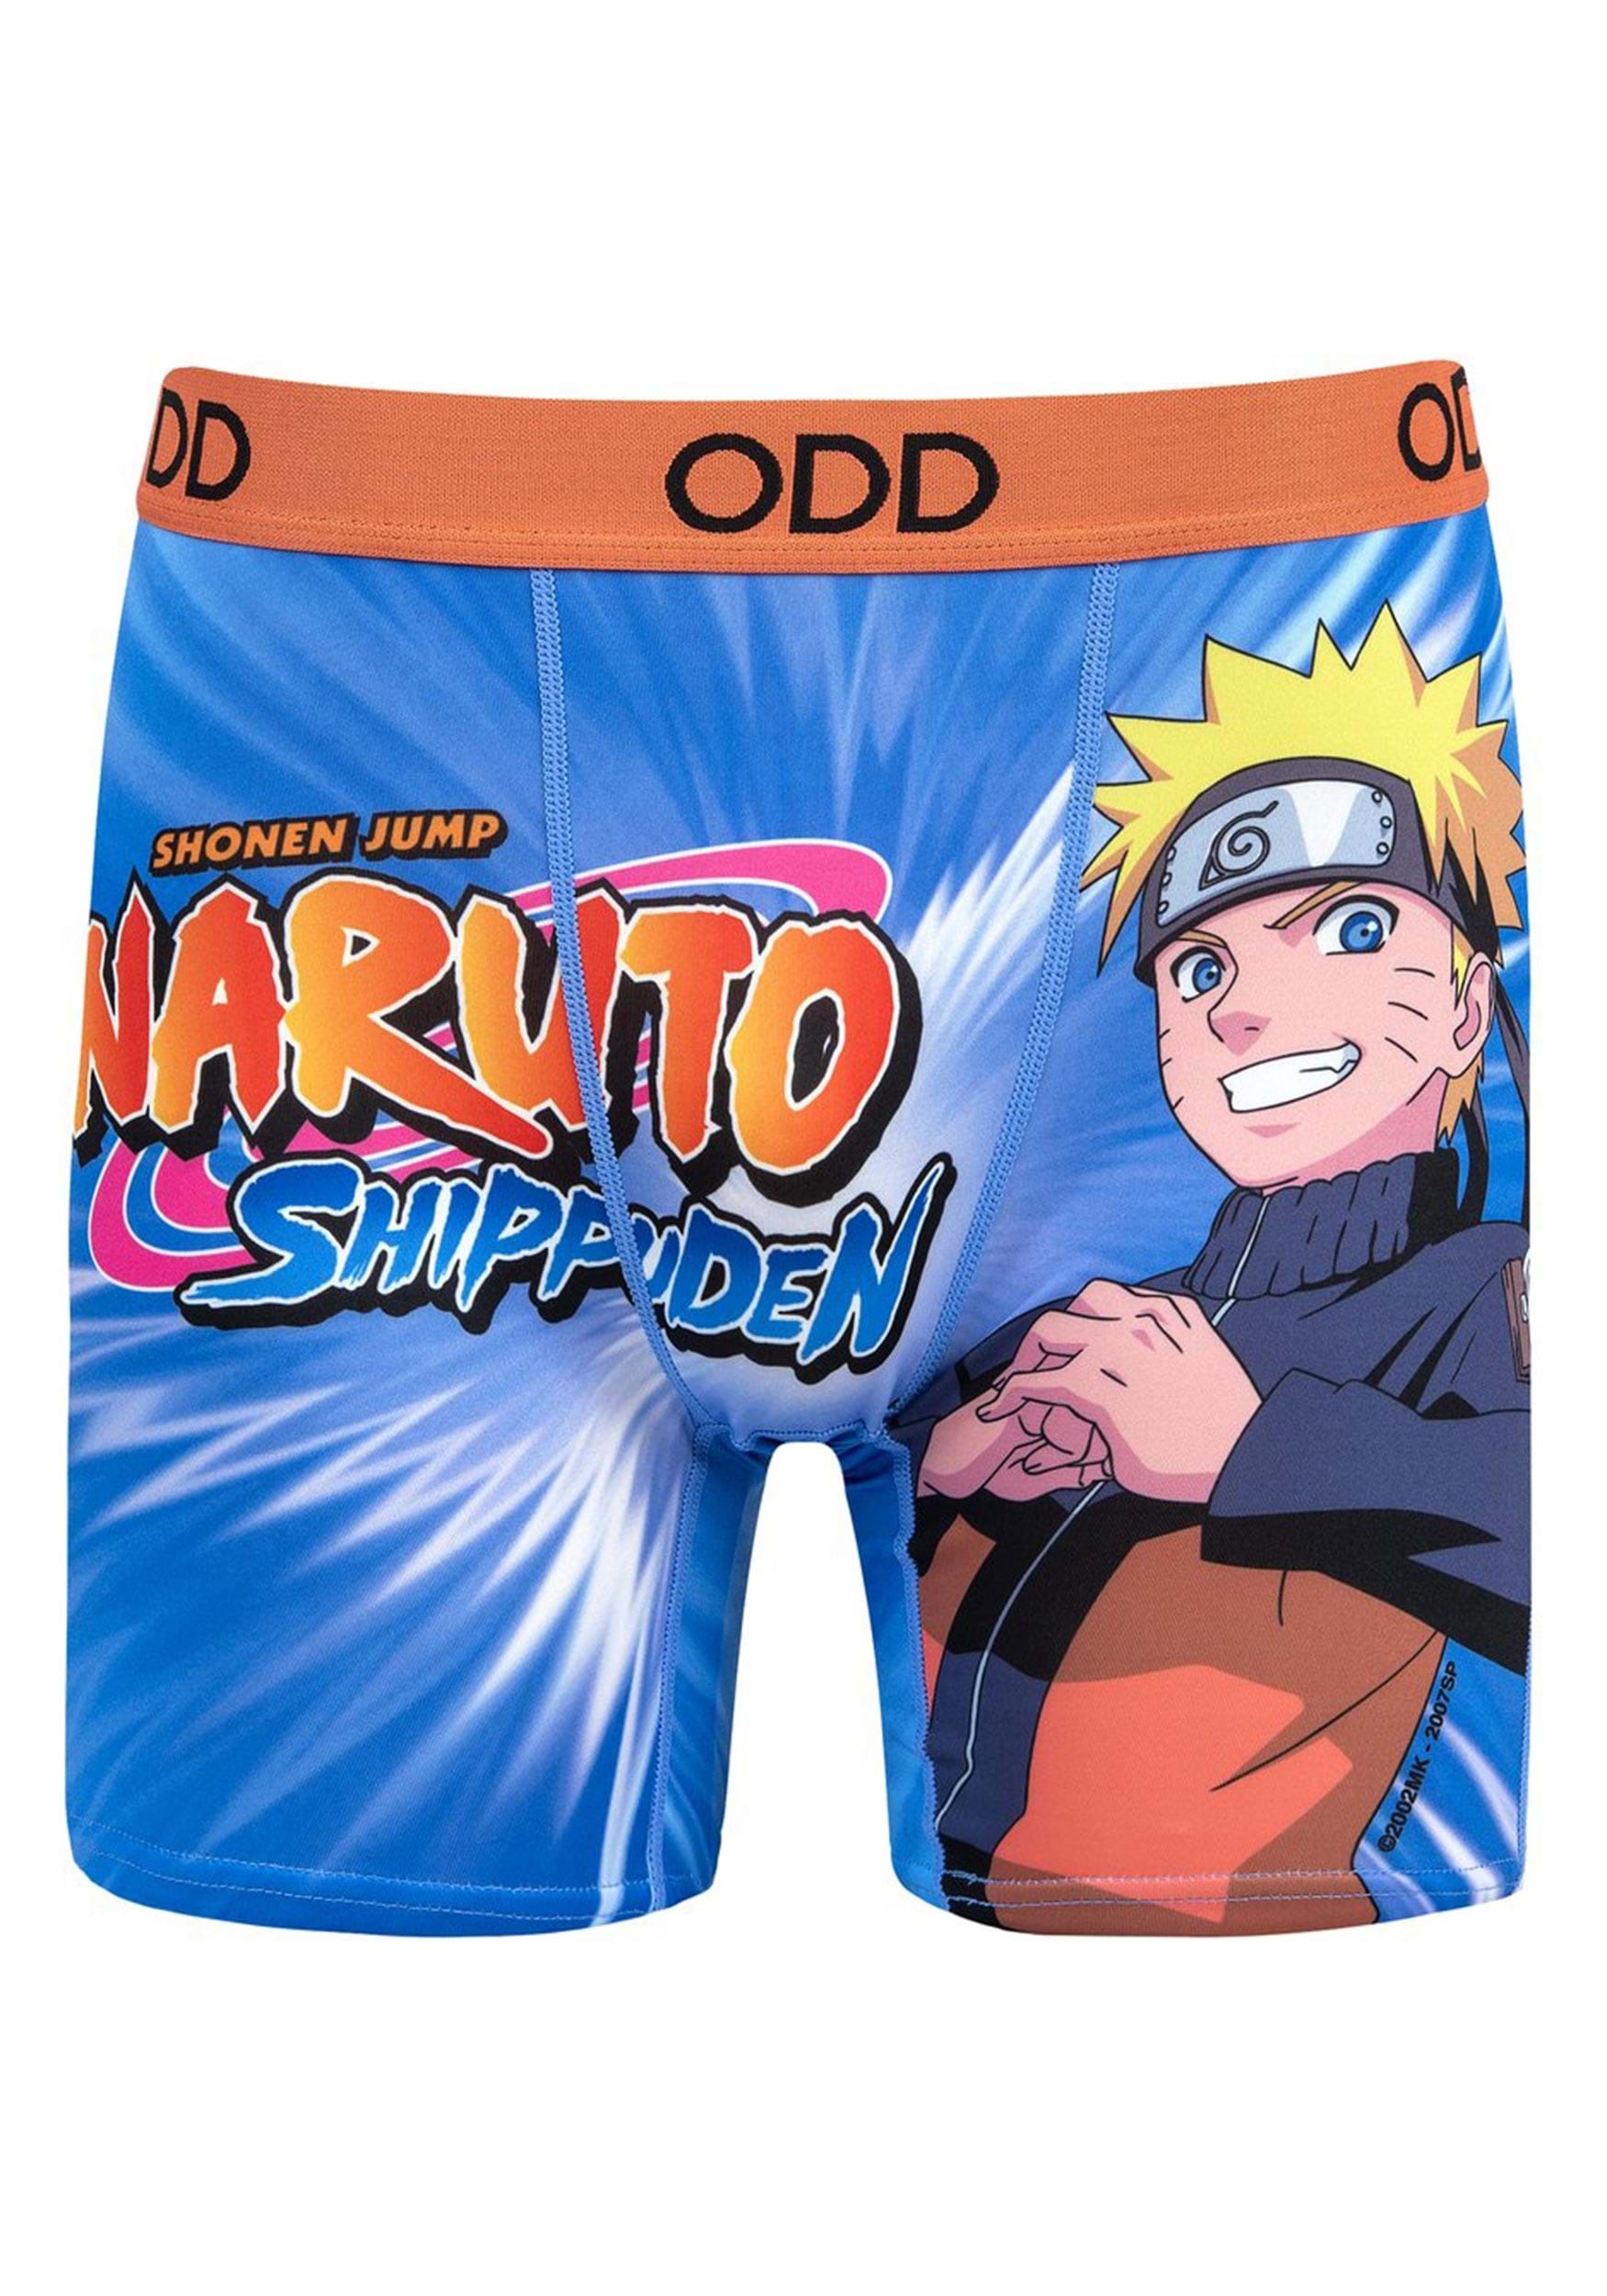 https://images.fun.co.uk/products/71506/1-1/naruto-mens-boxer-briefs.jpg